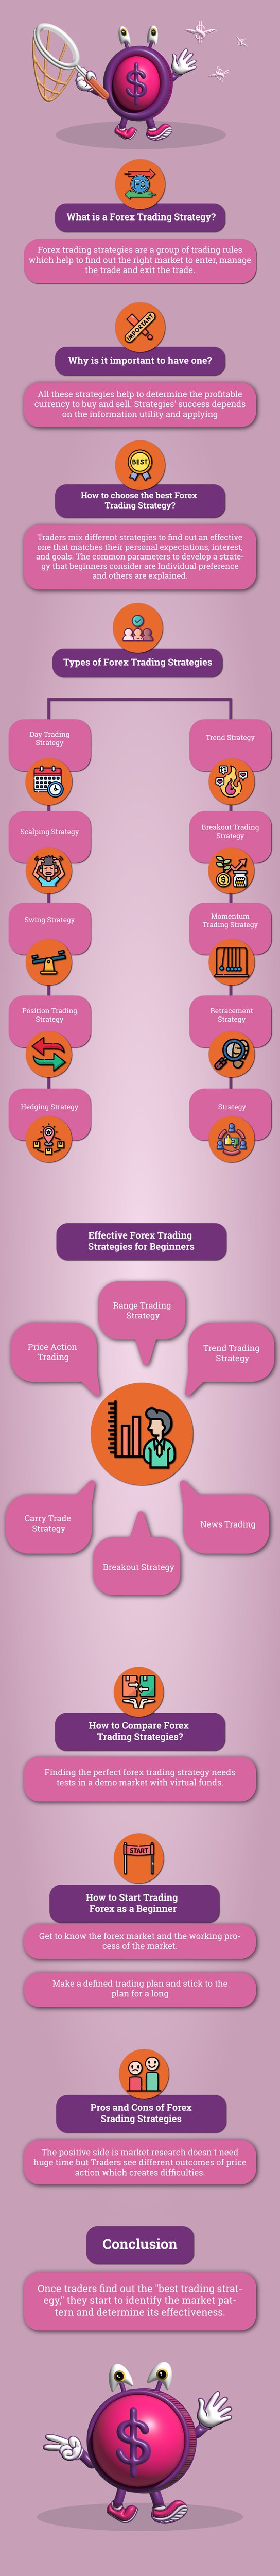 trading strategies for beginners